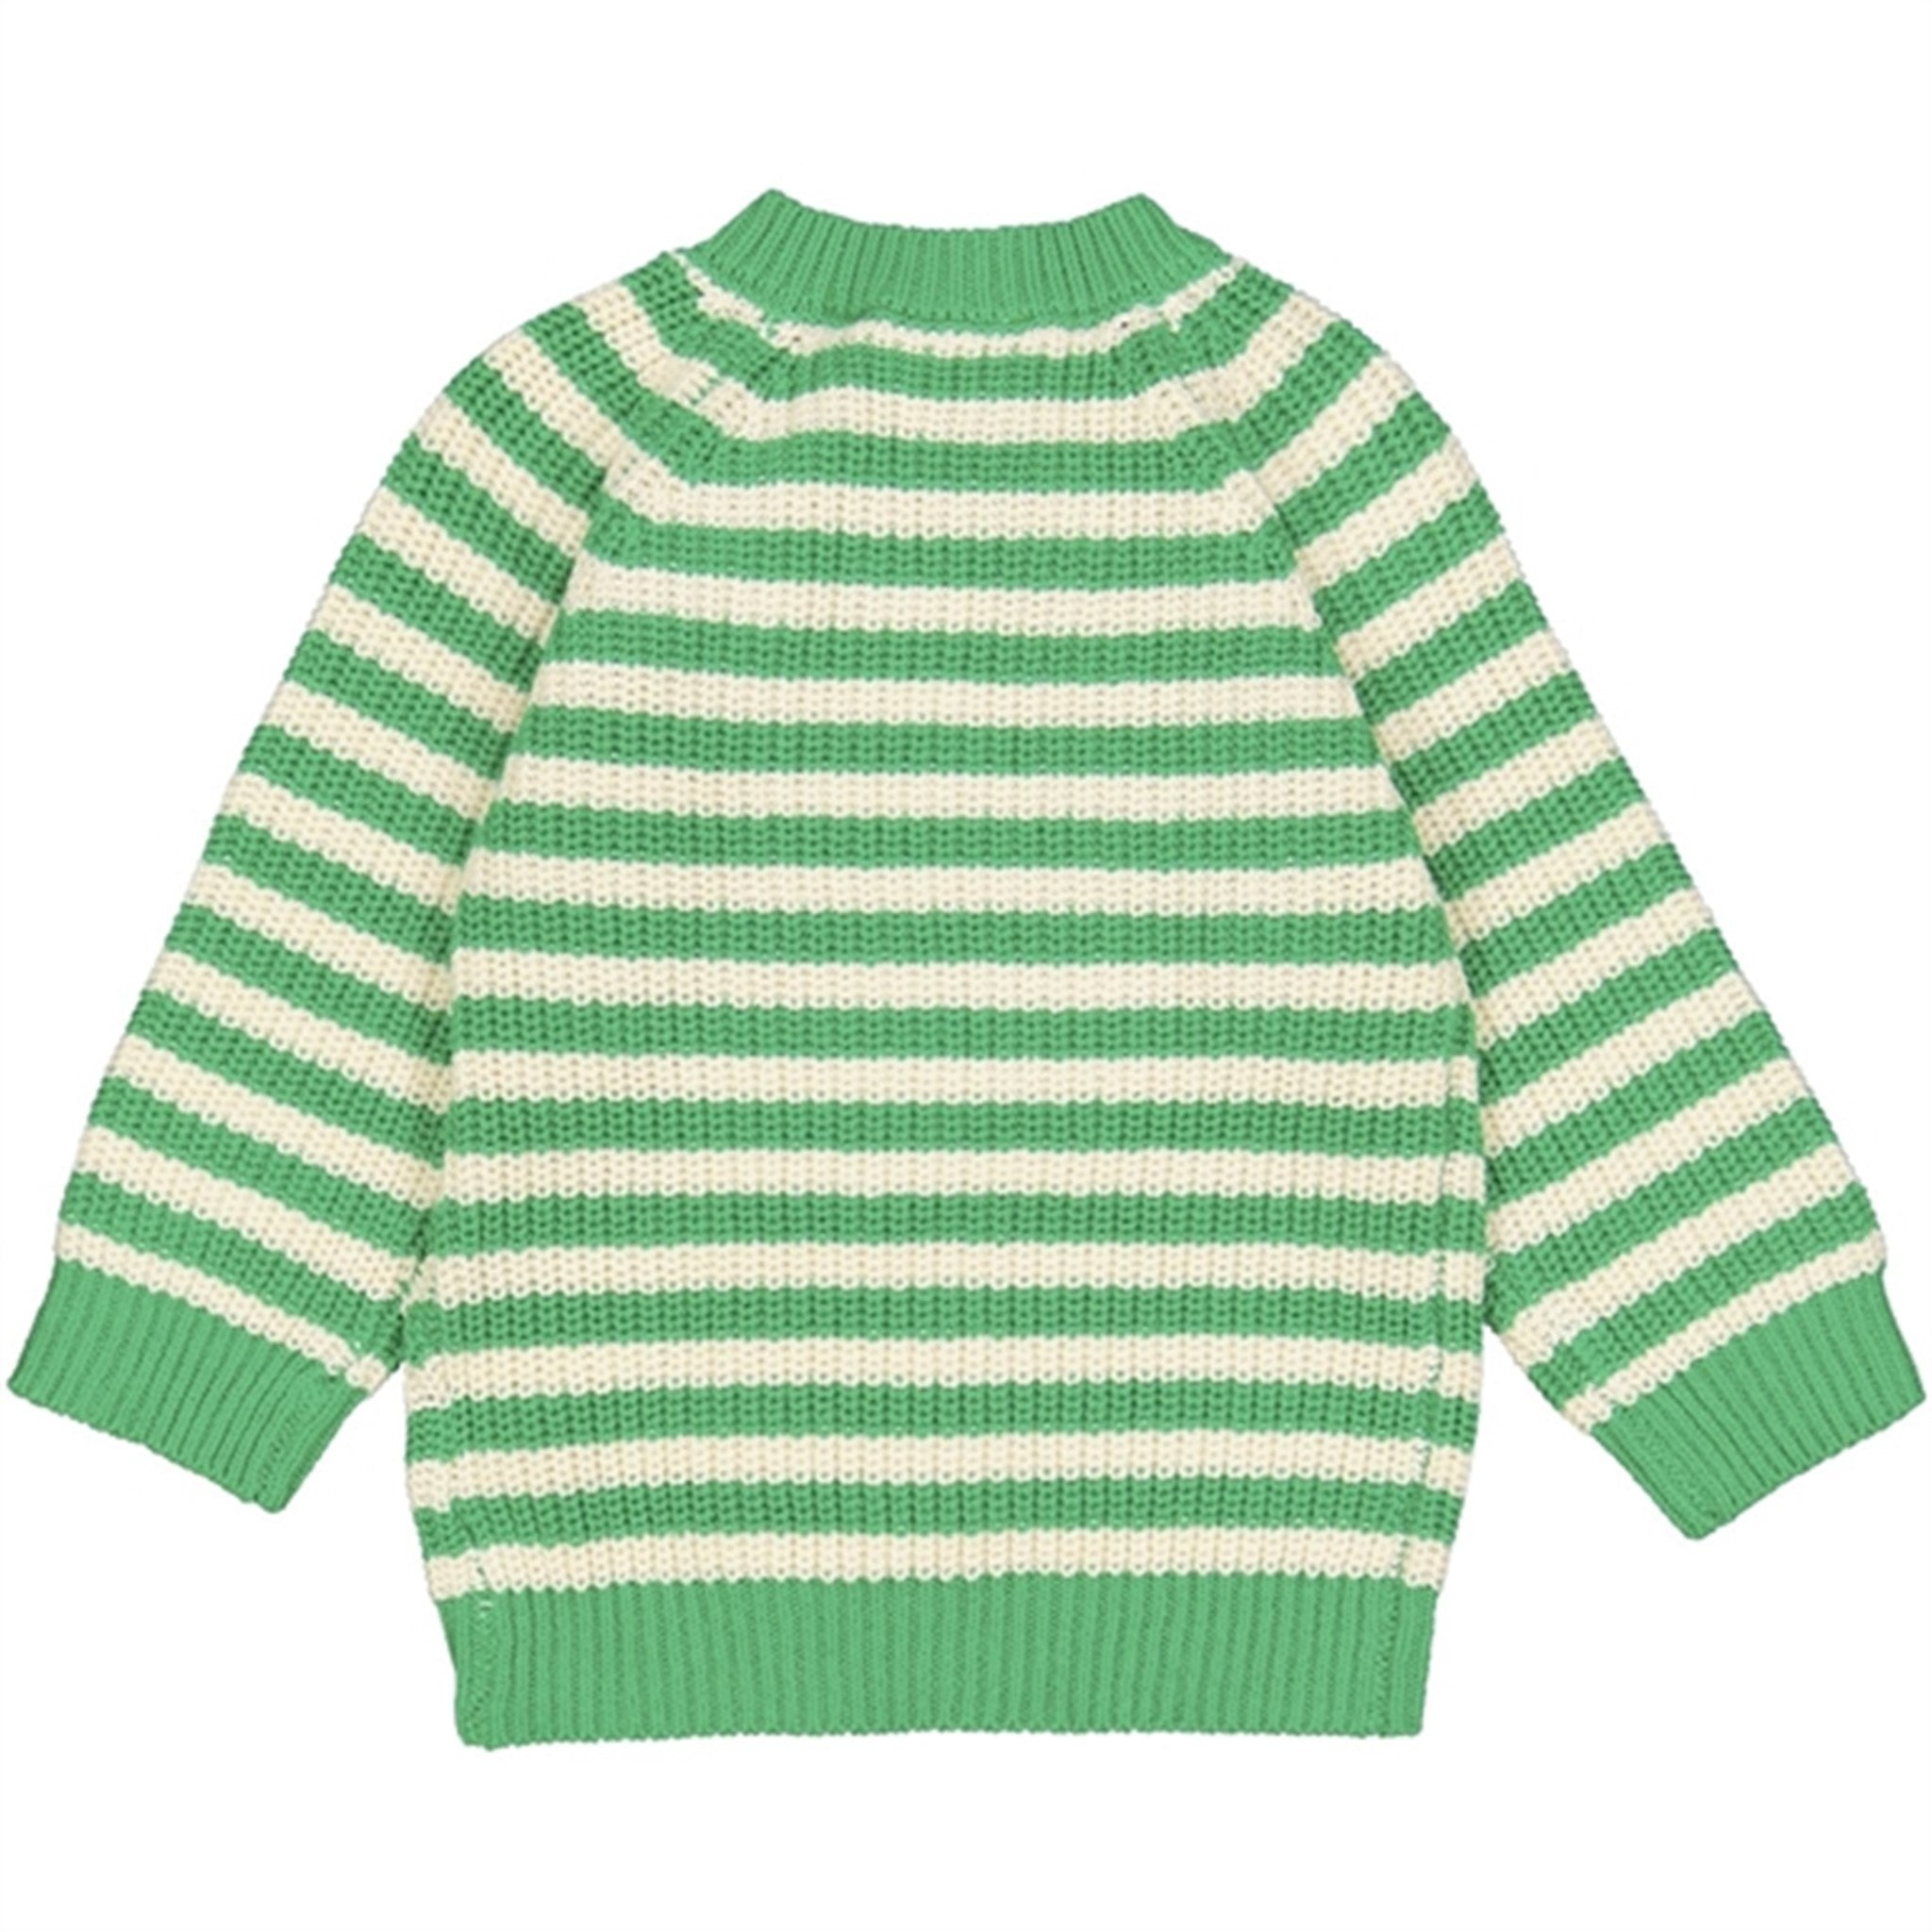 THE NEW Siblings Bright Green Ilfred Knit Pullover 5